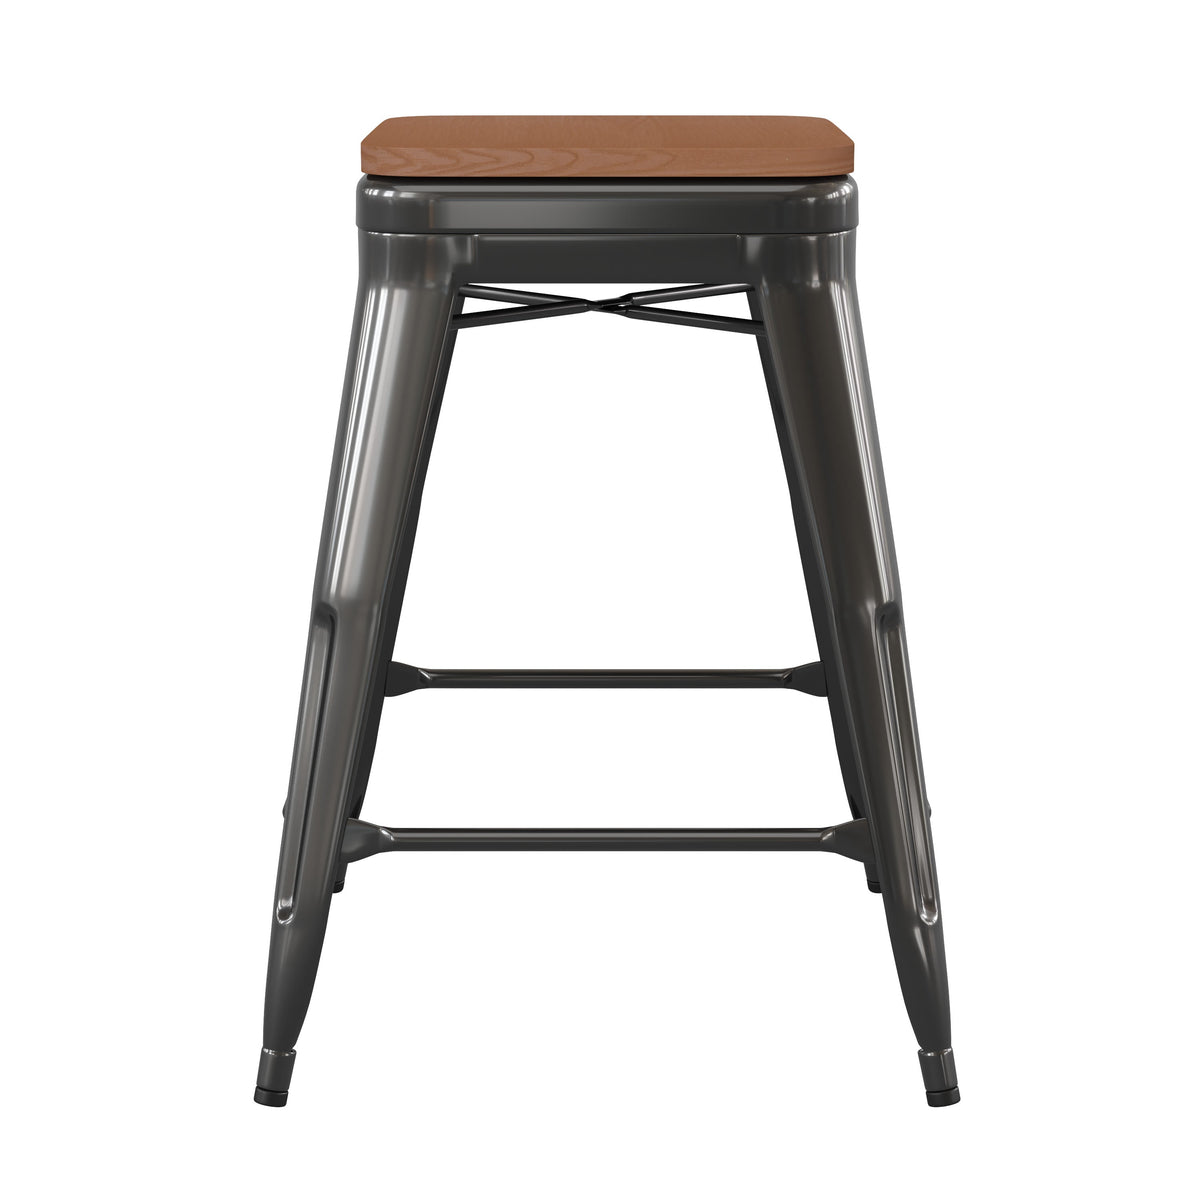 Black/Teak |#| Indoor/Outdoor Backless Counter Stool with Poly Seat - Black/Teak